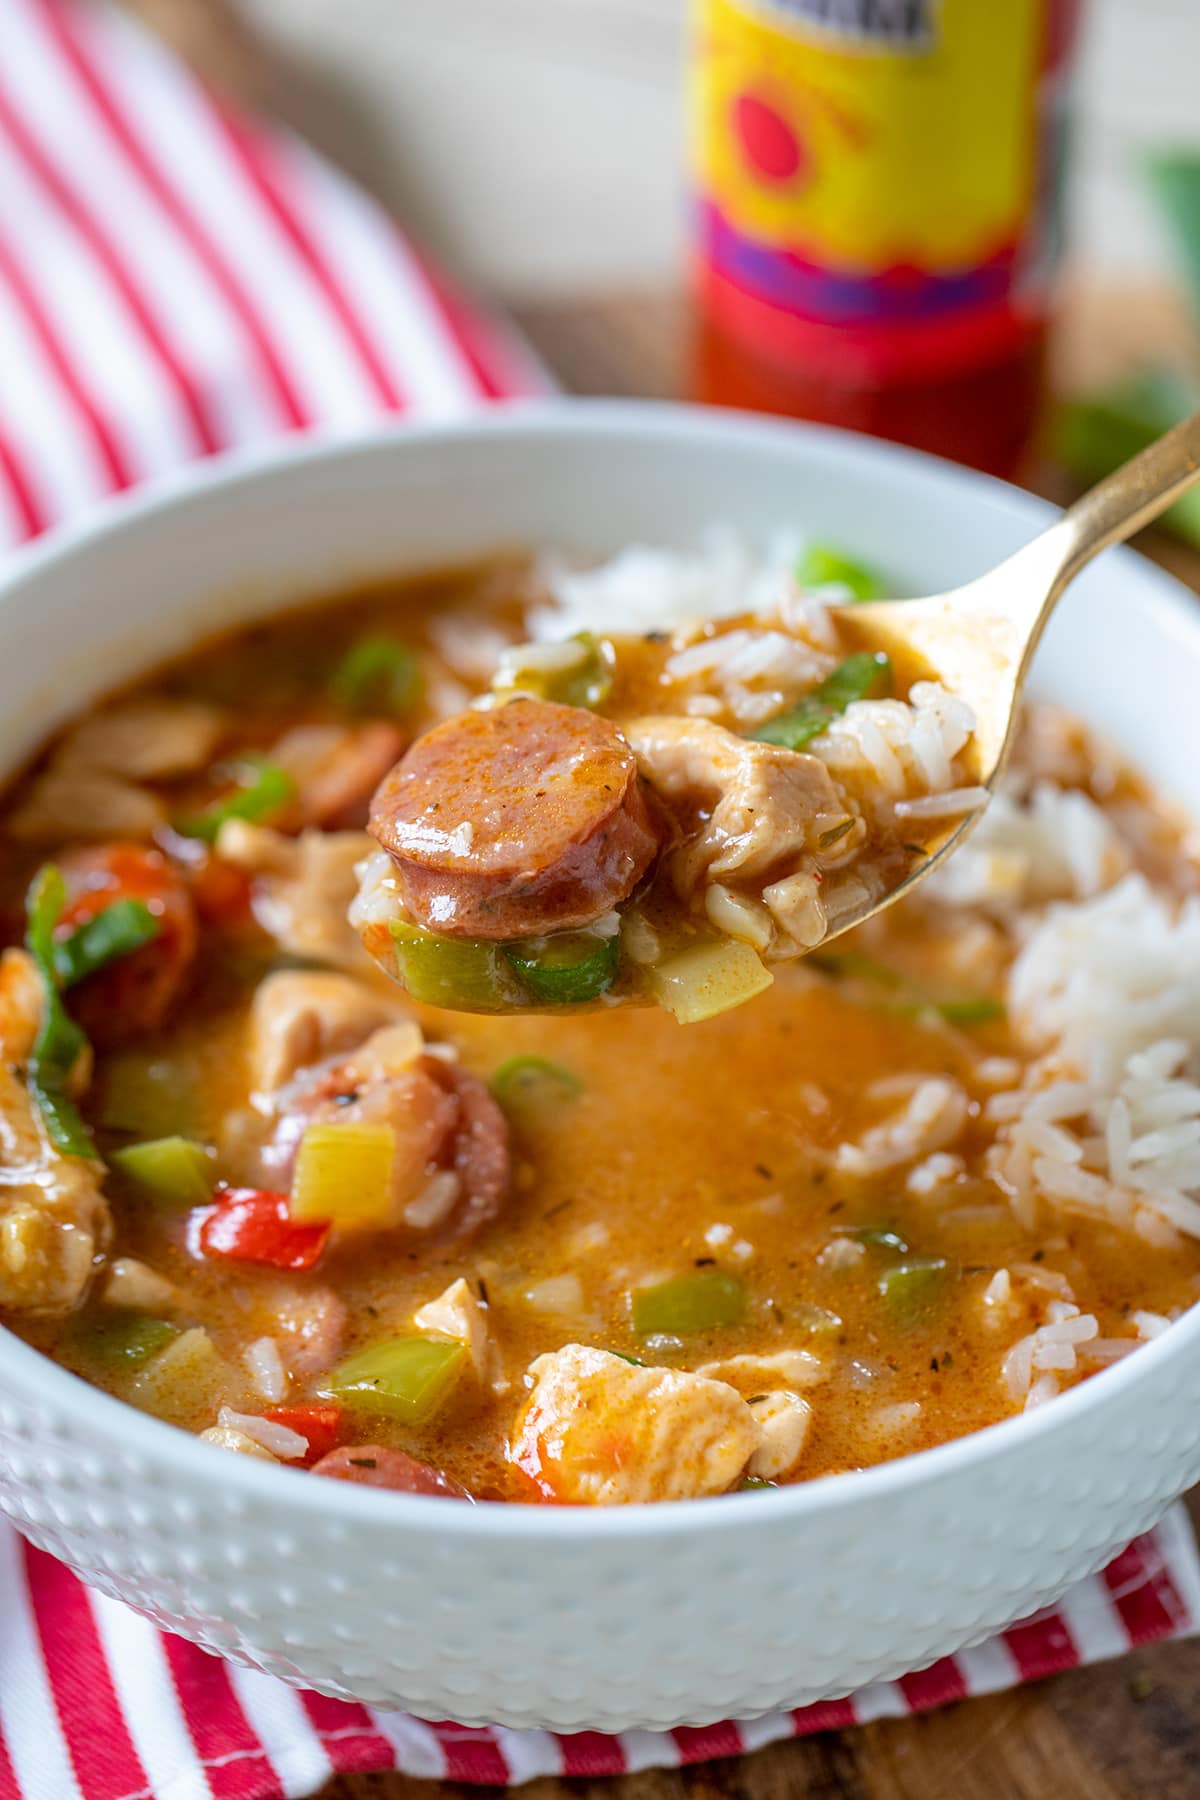 Ridiculously Easy Vegetable Gumbo and Cooking From Your Pantry and